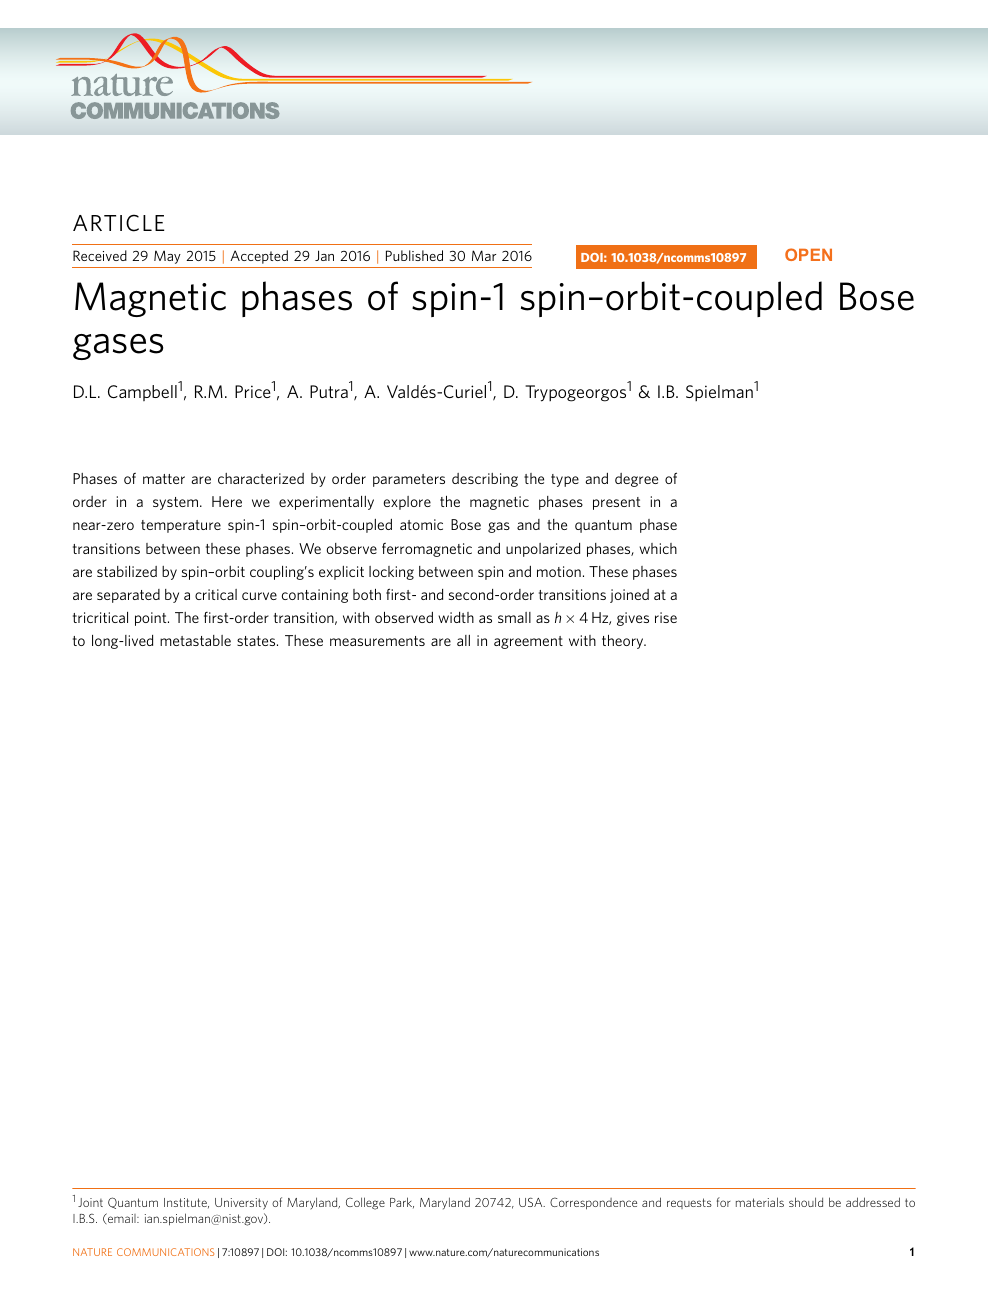 Magnetic Phases Of Spin 1 Spin Orbit Coupled Bose Gases Topic Of Research Paper In Physical Sciences Download Scholarly Article Pdf And Read For Free On Cyberleninka Open Science Hub